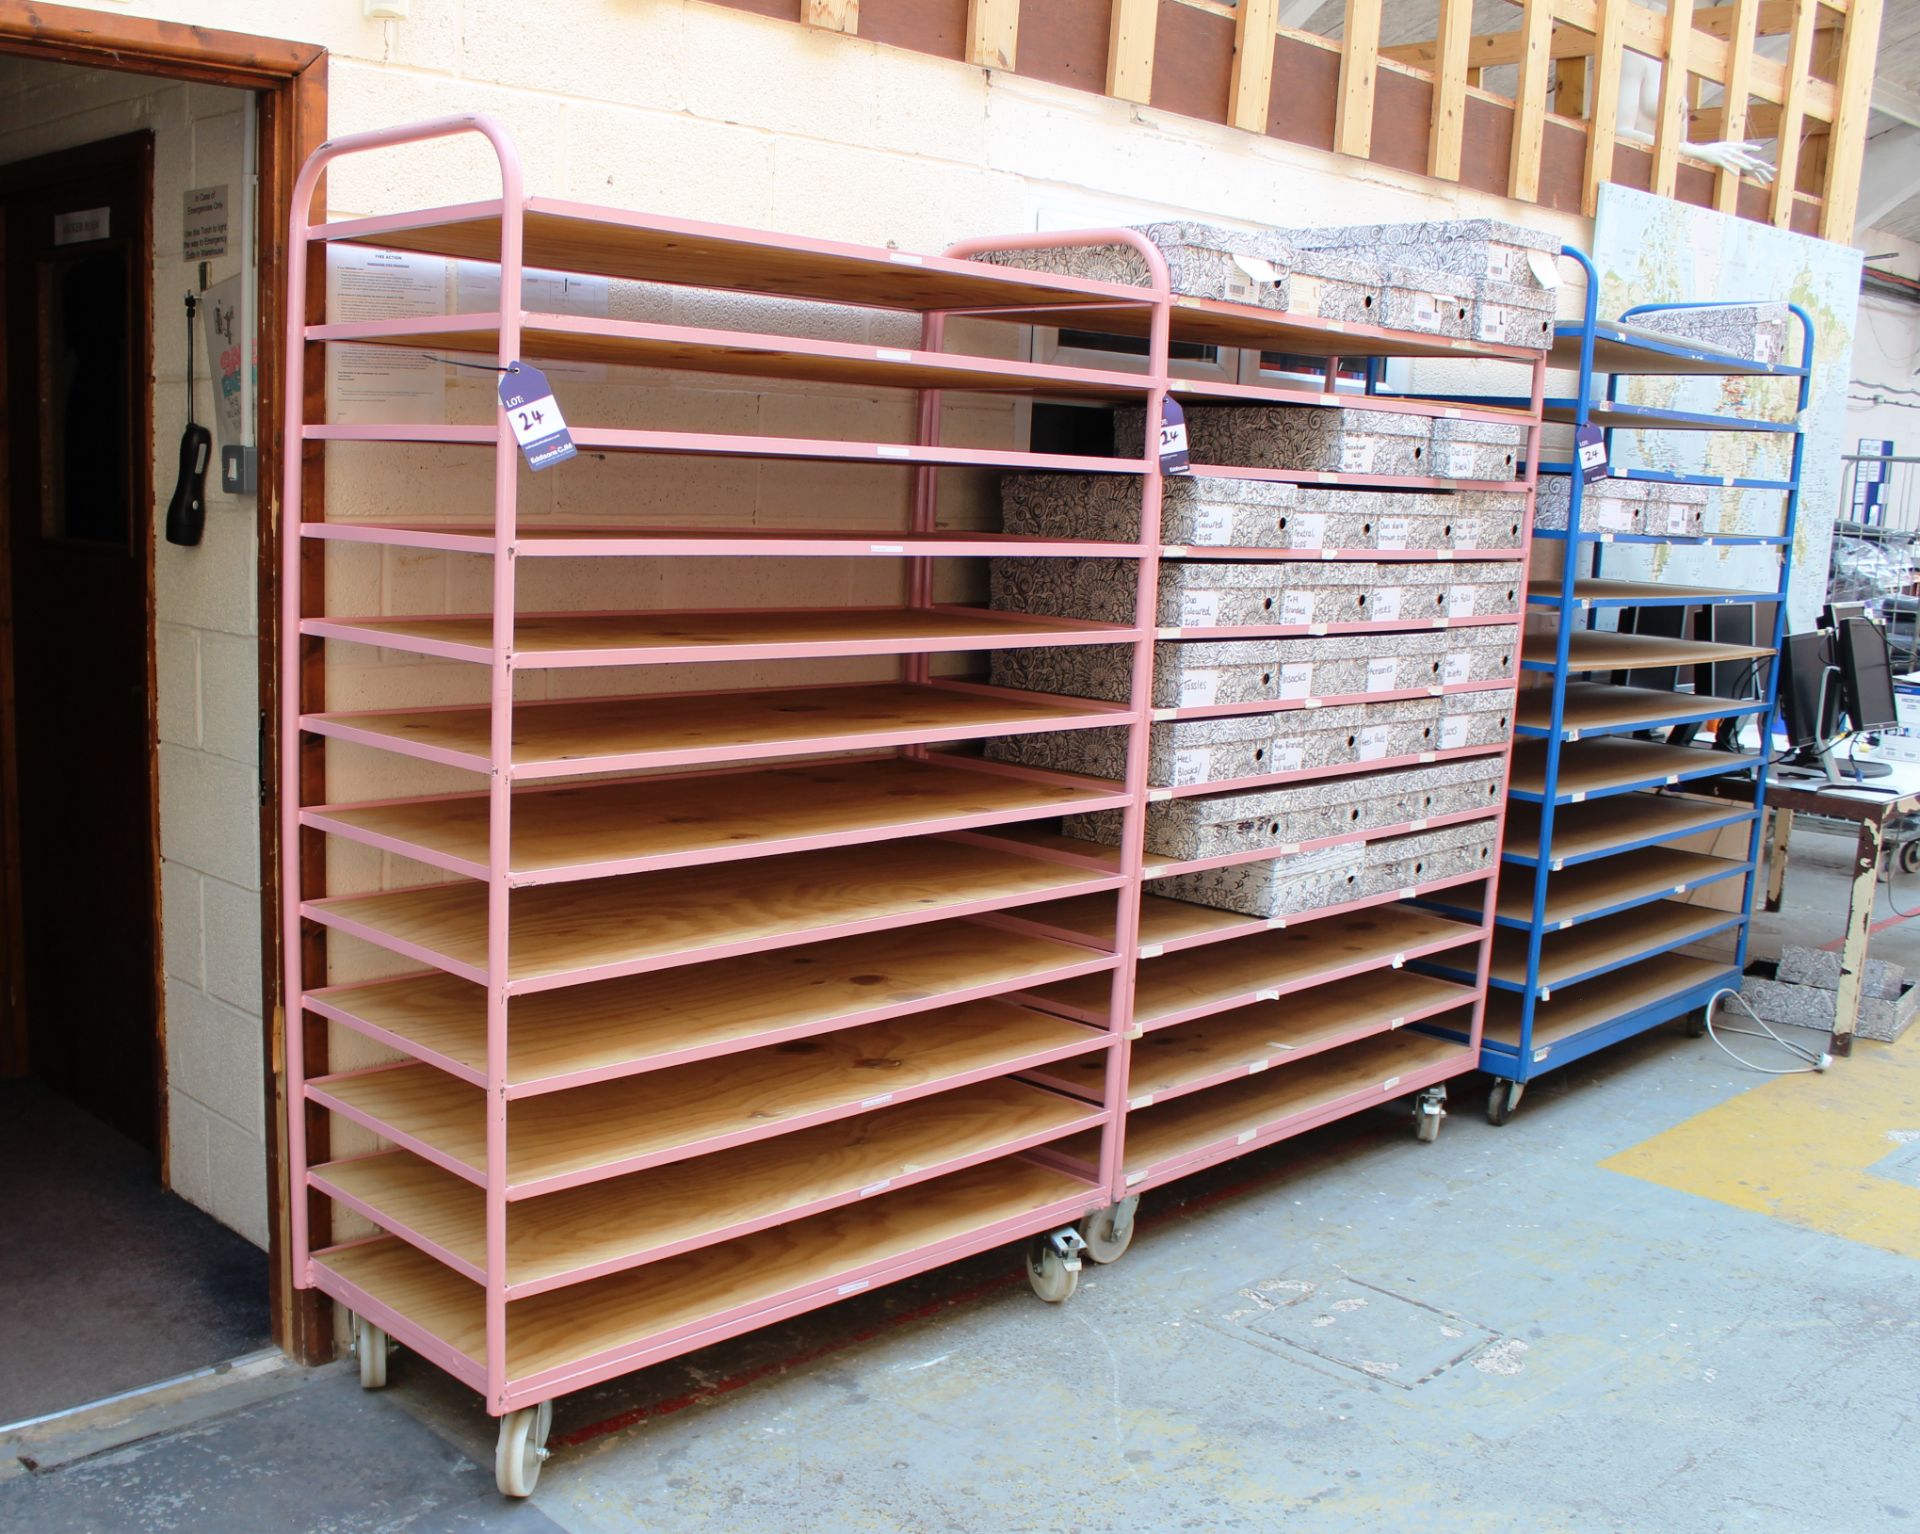 3 mobile steel Trolley/Cages, 12 shelves